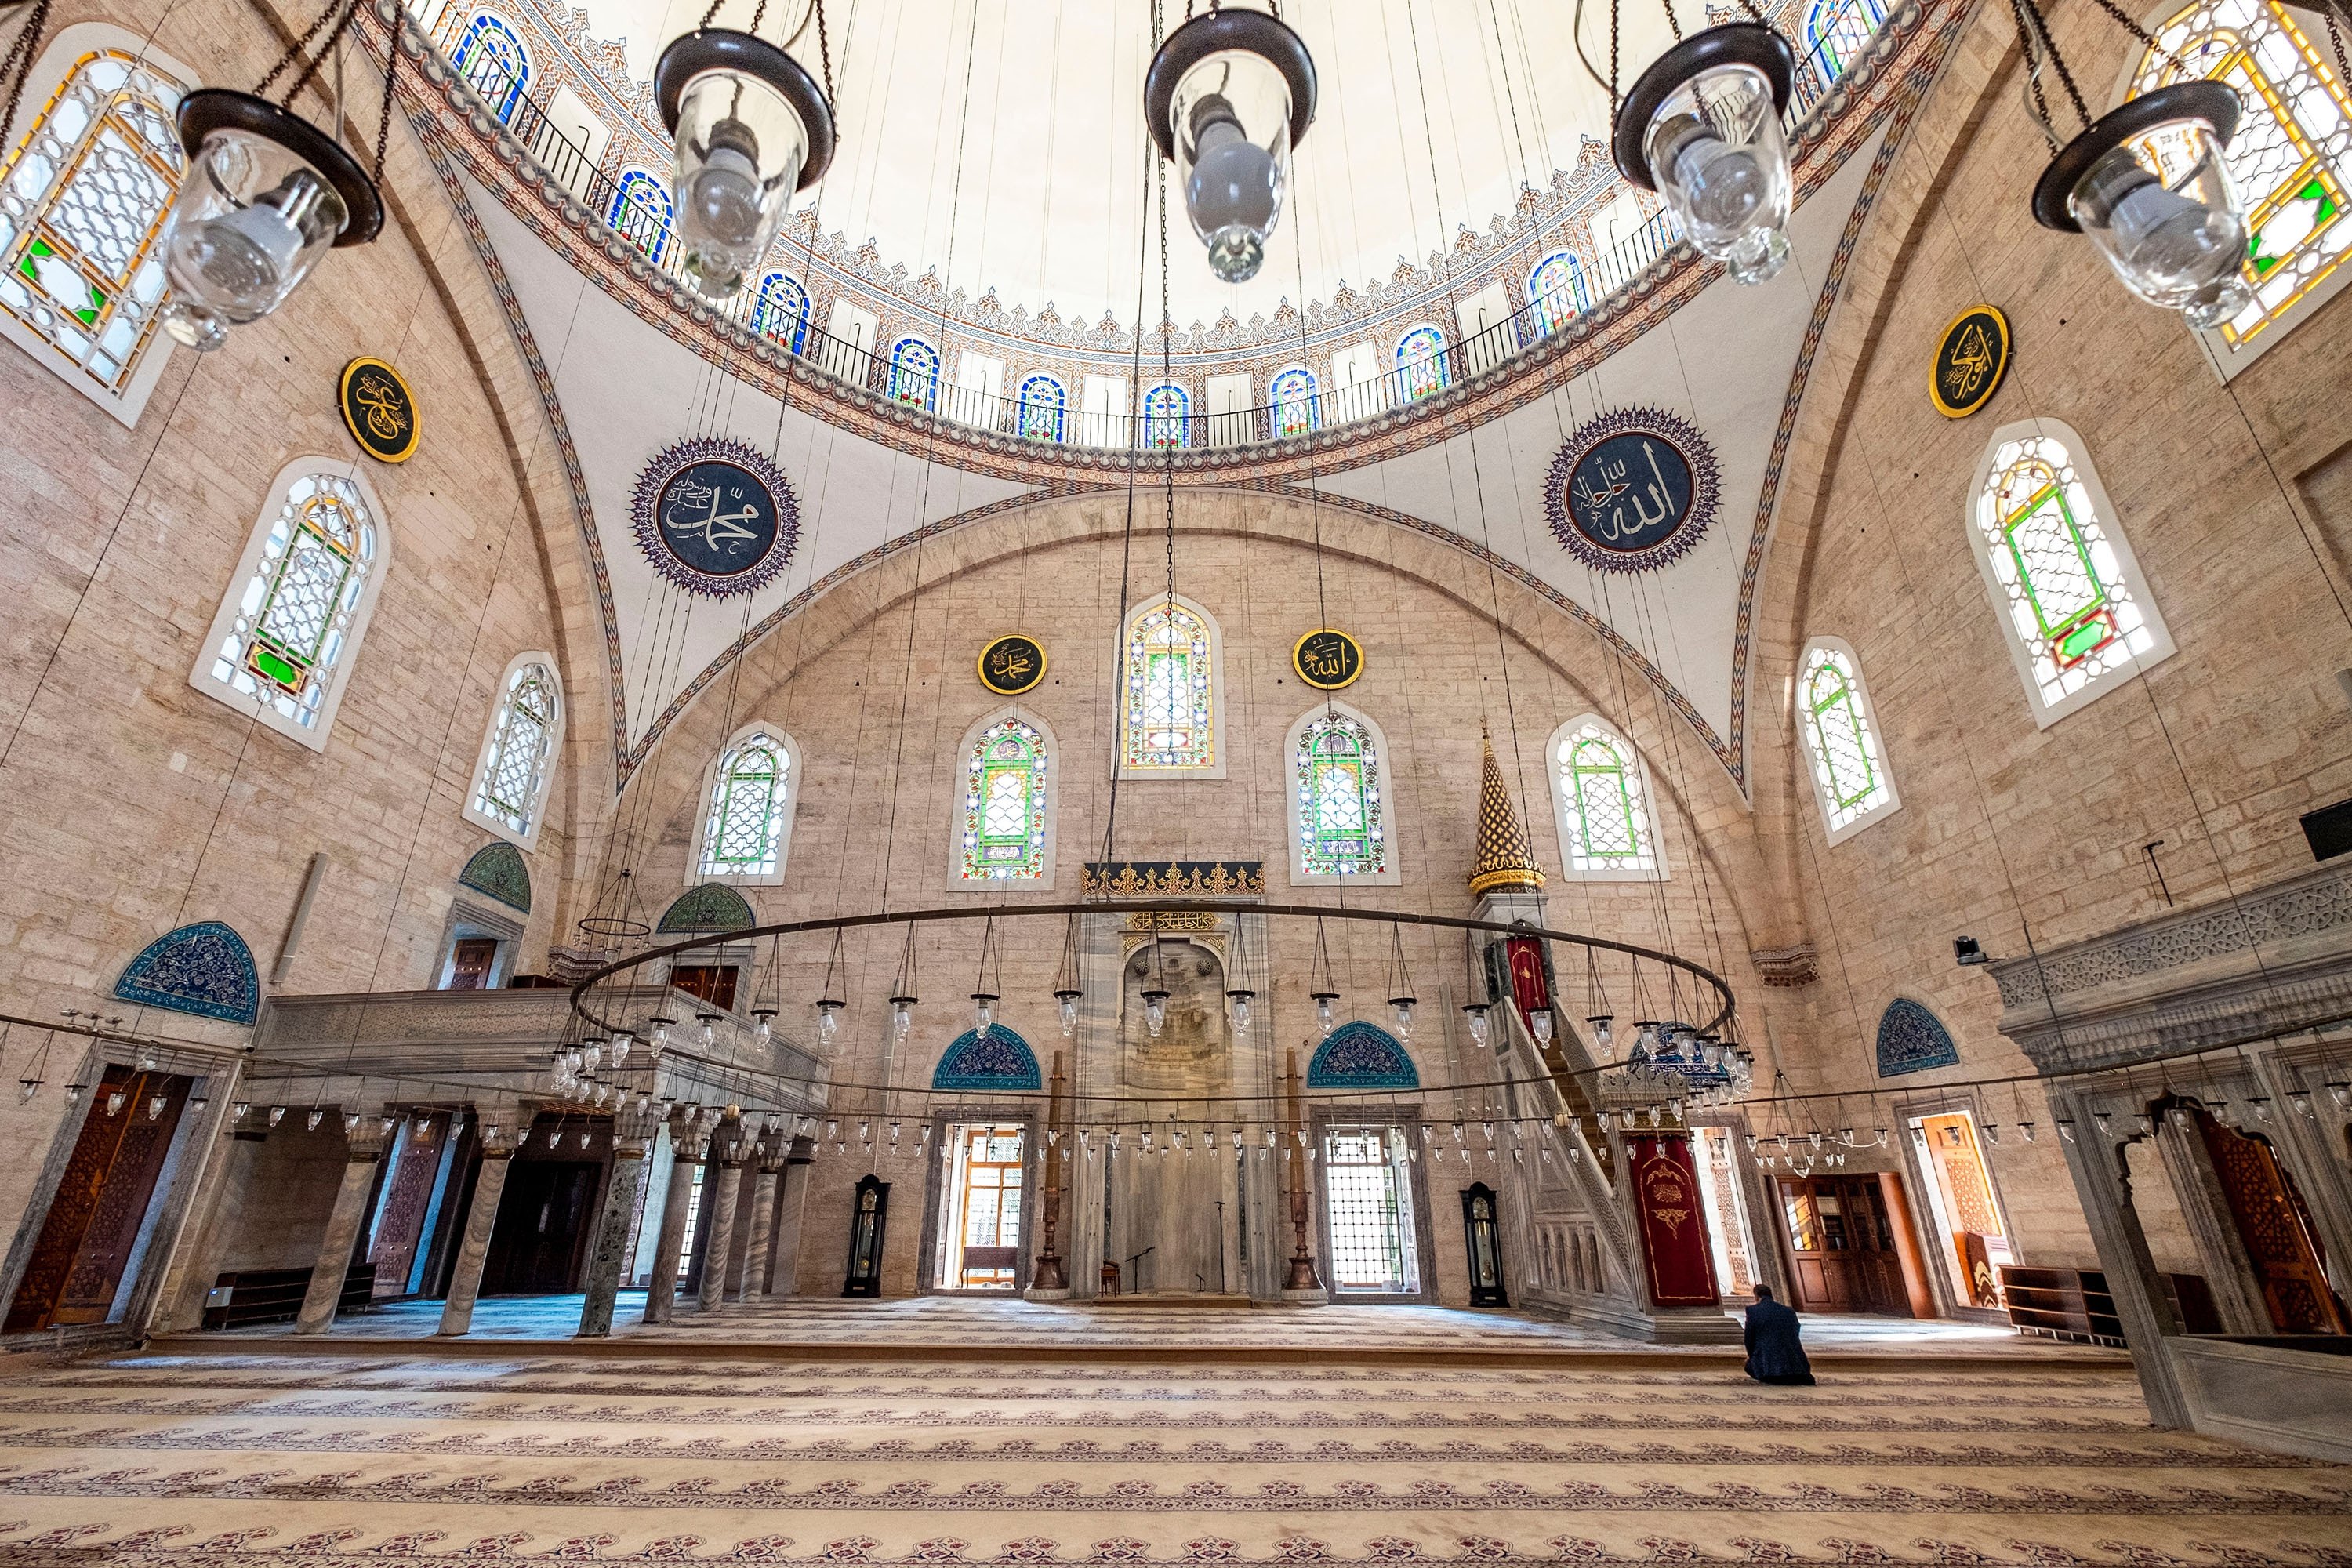 An interior view from the Yavuz Selim Mosque, Istanbul.